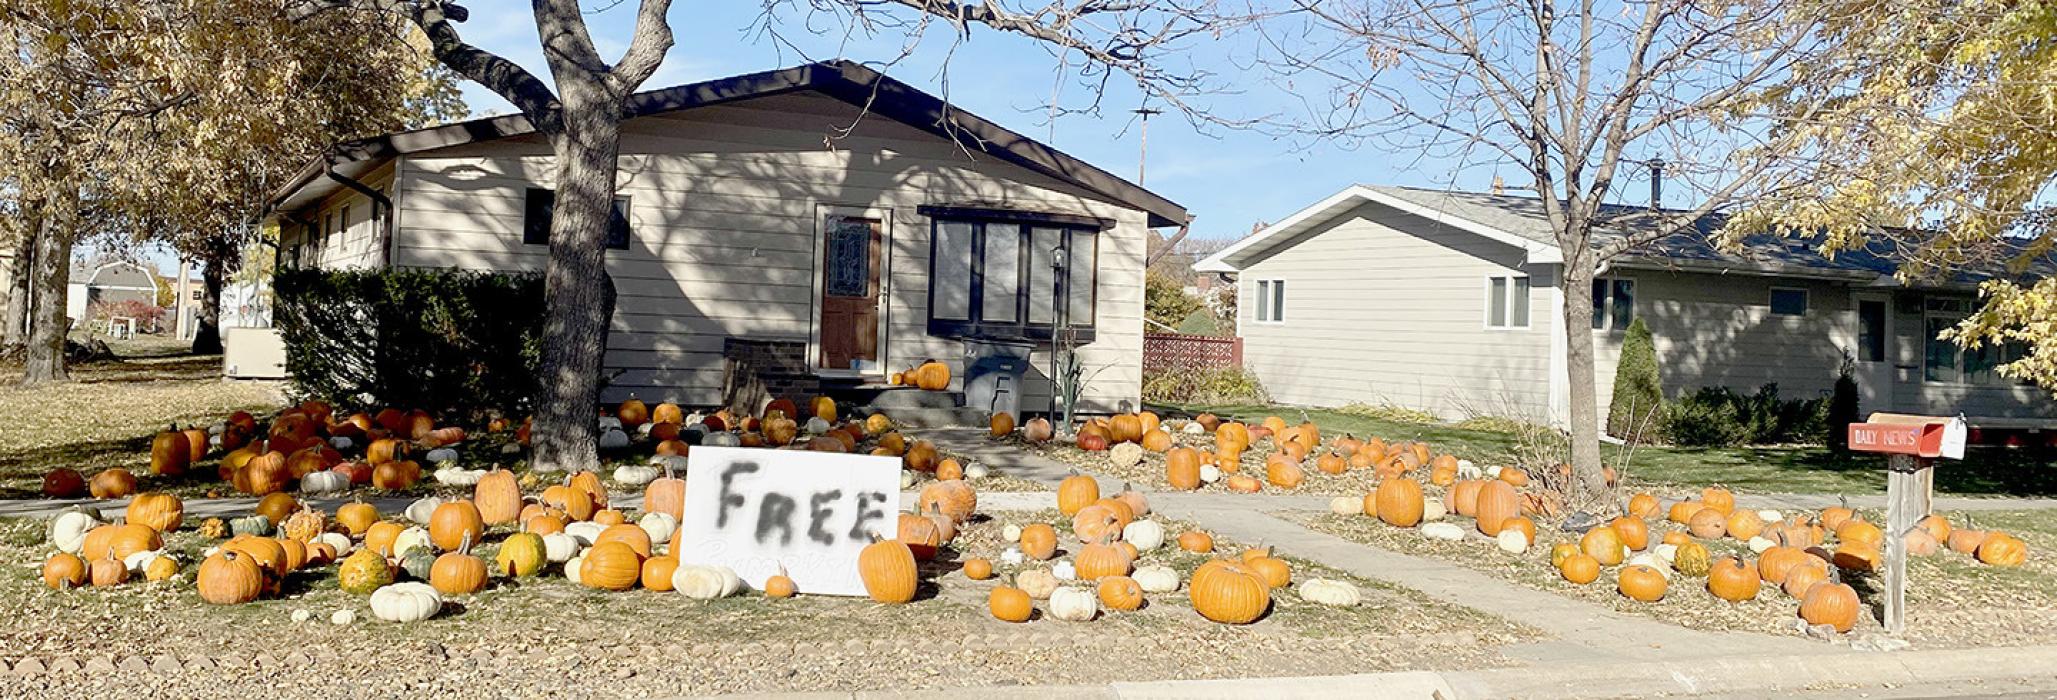 Although everyone wasn’t treated, the Drake Fiala resident, located on Second Street in Ainsworth, was provided with a large number of pumpkins without requesting them. What a way to be greeted when they came home from work.